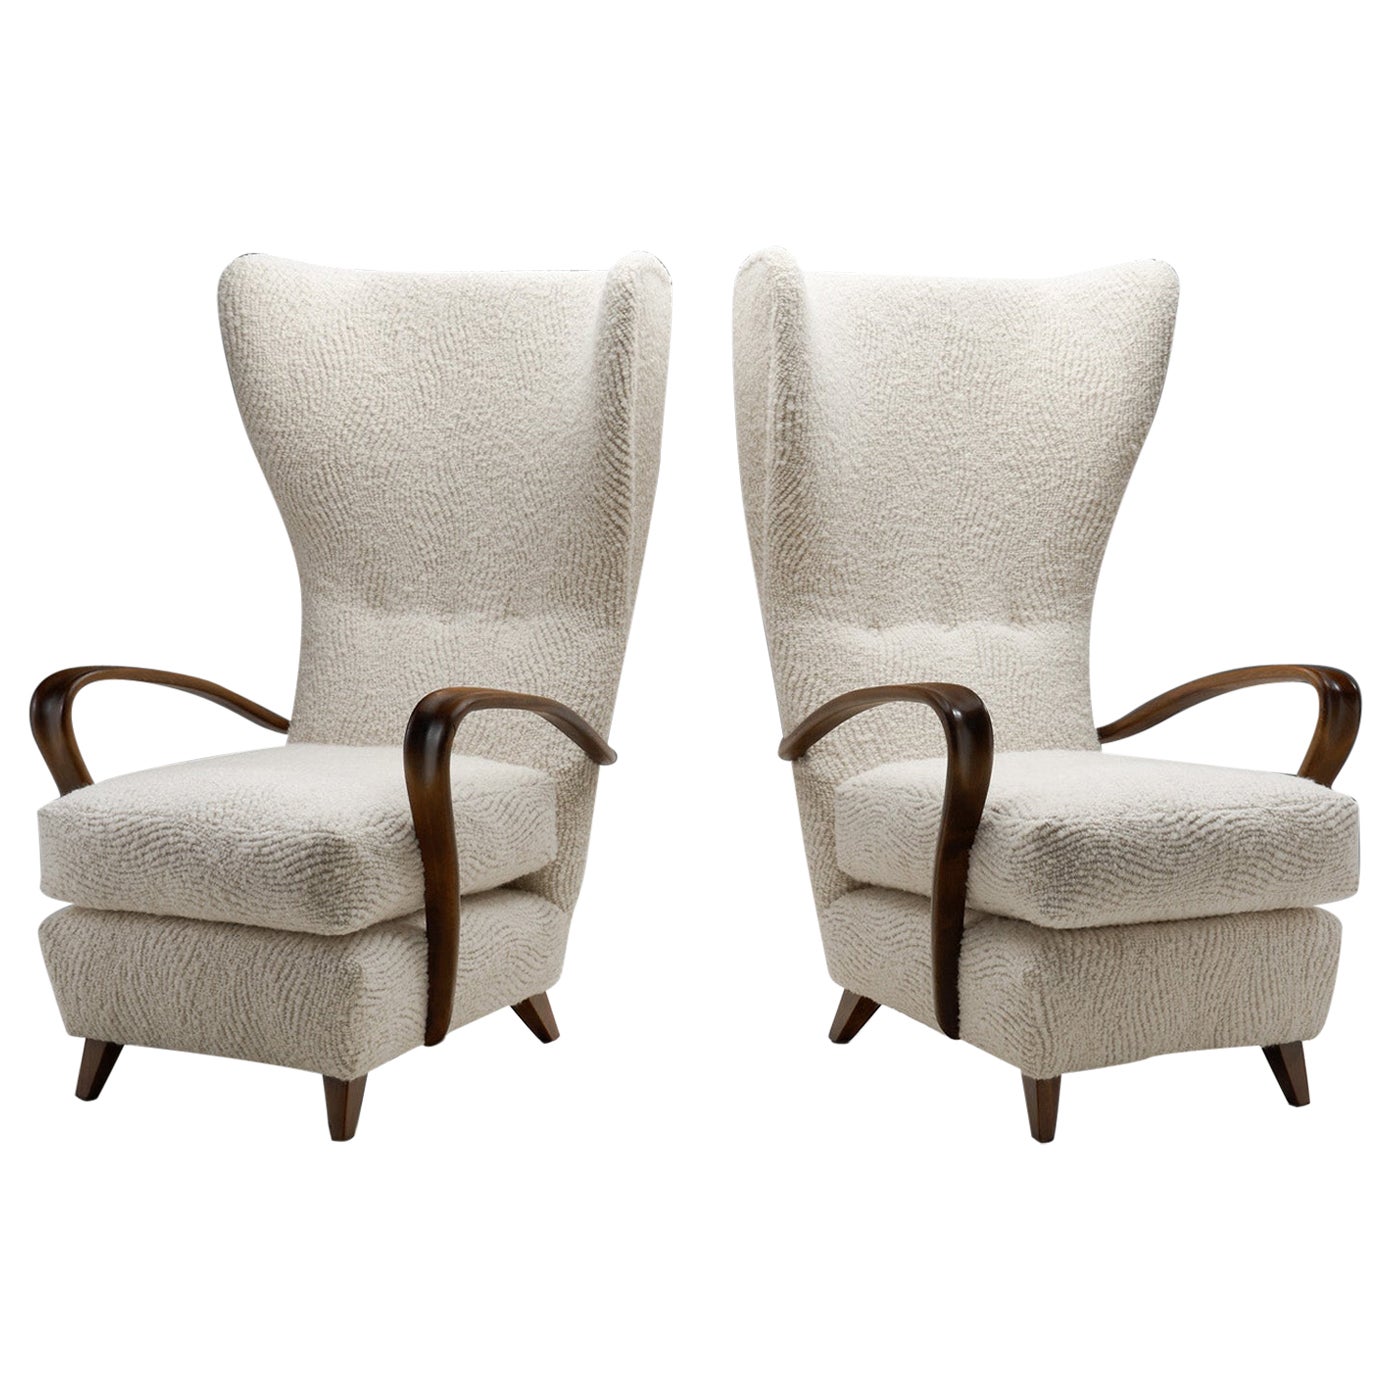 Italian Mid-Century Modern Wingback Chairs in Bouclé, Italy 1950s For Sale